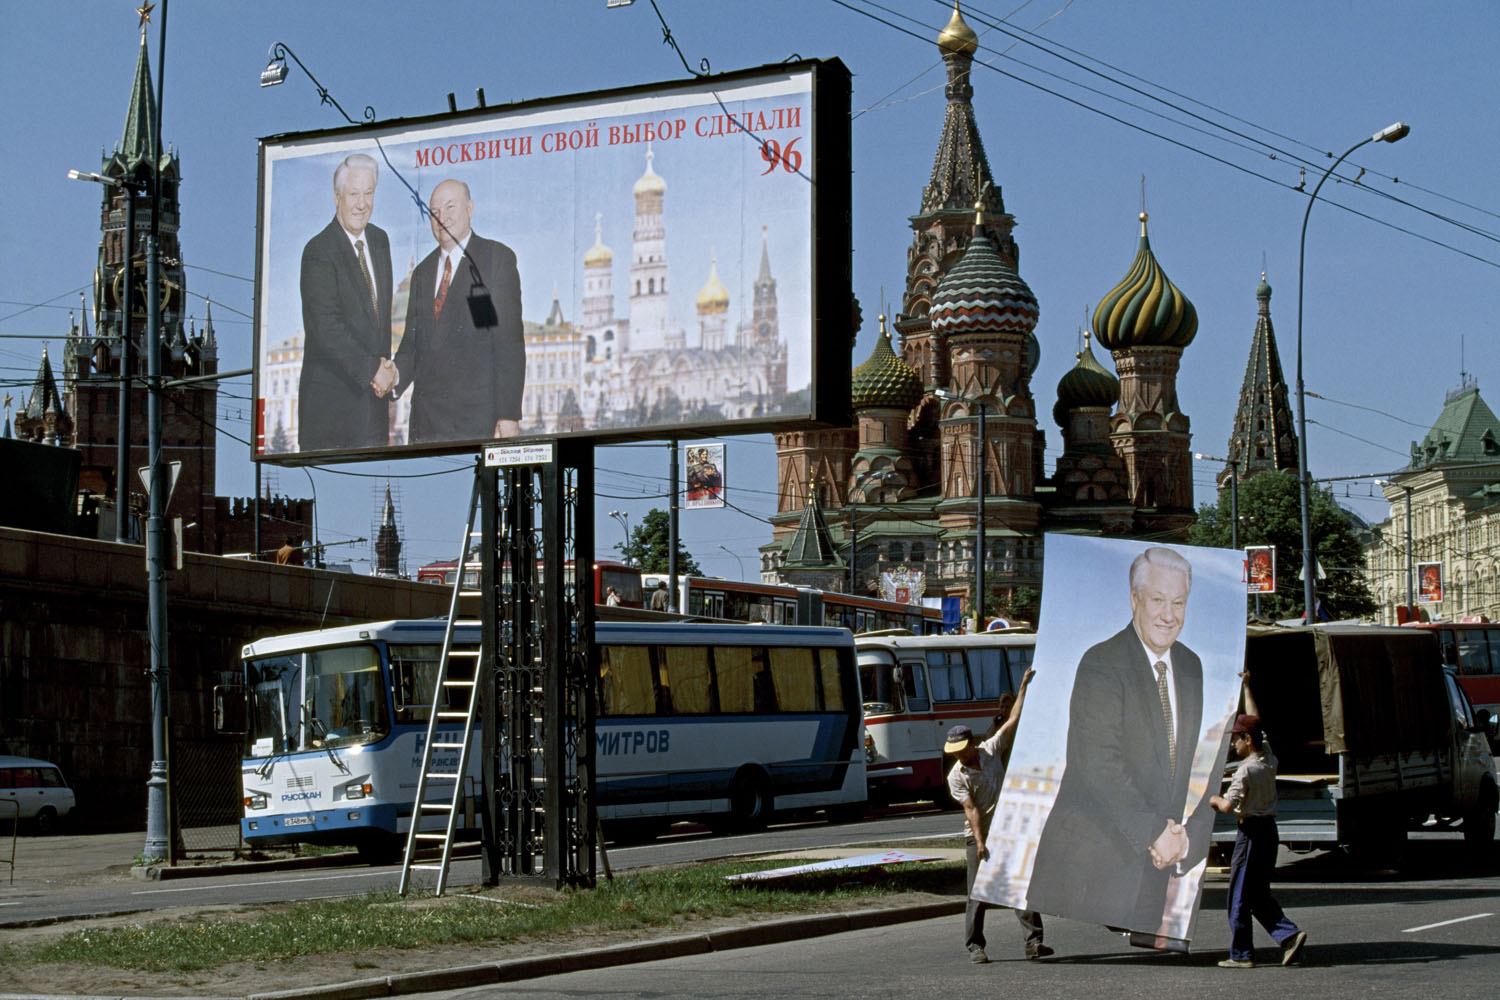 Workers install Boris Yeltsin's election posters next to the Red Square by Thomas Hoepker. Moscow, Russia (1996). Image: Magnum Photos